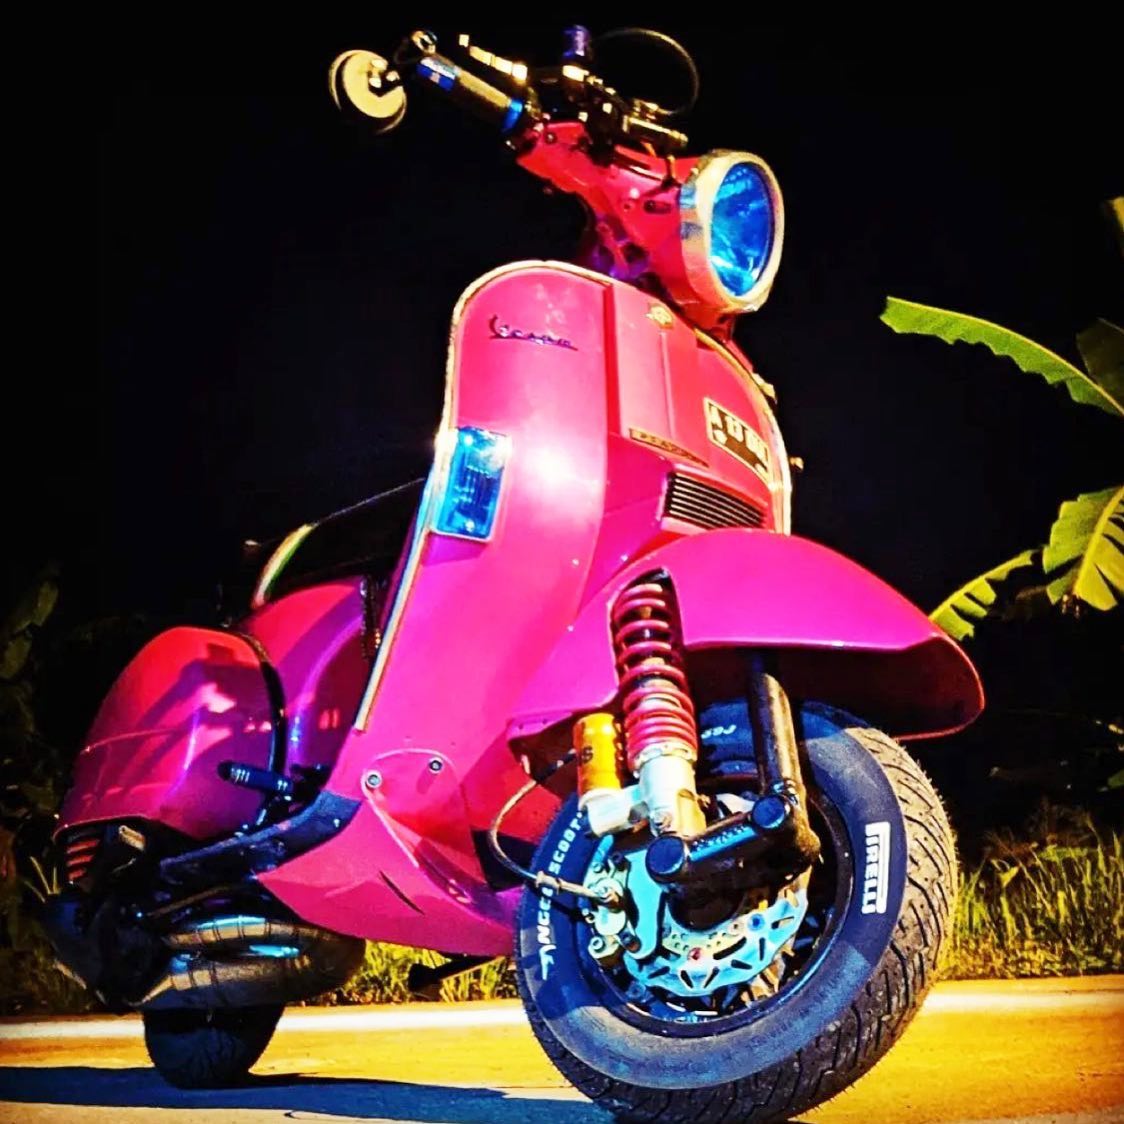 Pink Vespa PX custom modified 

Order Vespa genuine wheel from official dealer
Contact Wa 0819-04-595959
Cek photos in highlight @vesparkindo 
Atau shop online www.tokopedia.com/vesparkindo 

Hashtag and mention @vespapxnet for feature repost
Check website www.vespapx.net for more 

@bobsulaey83